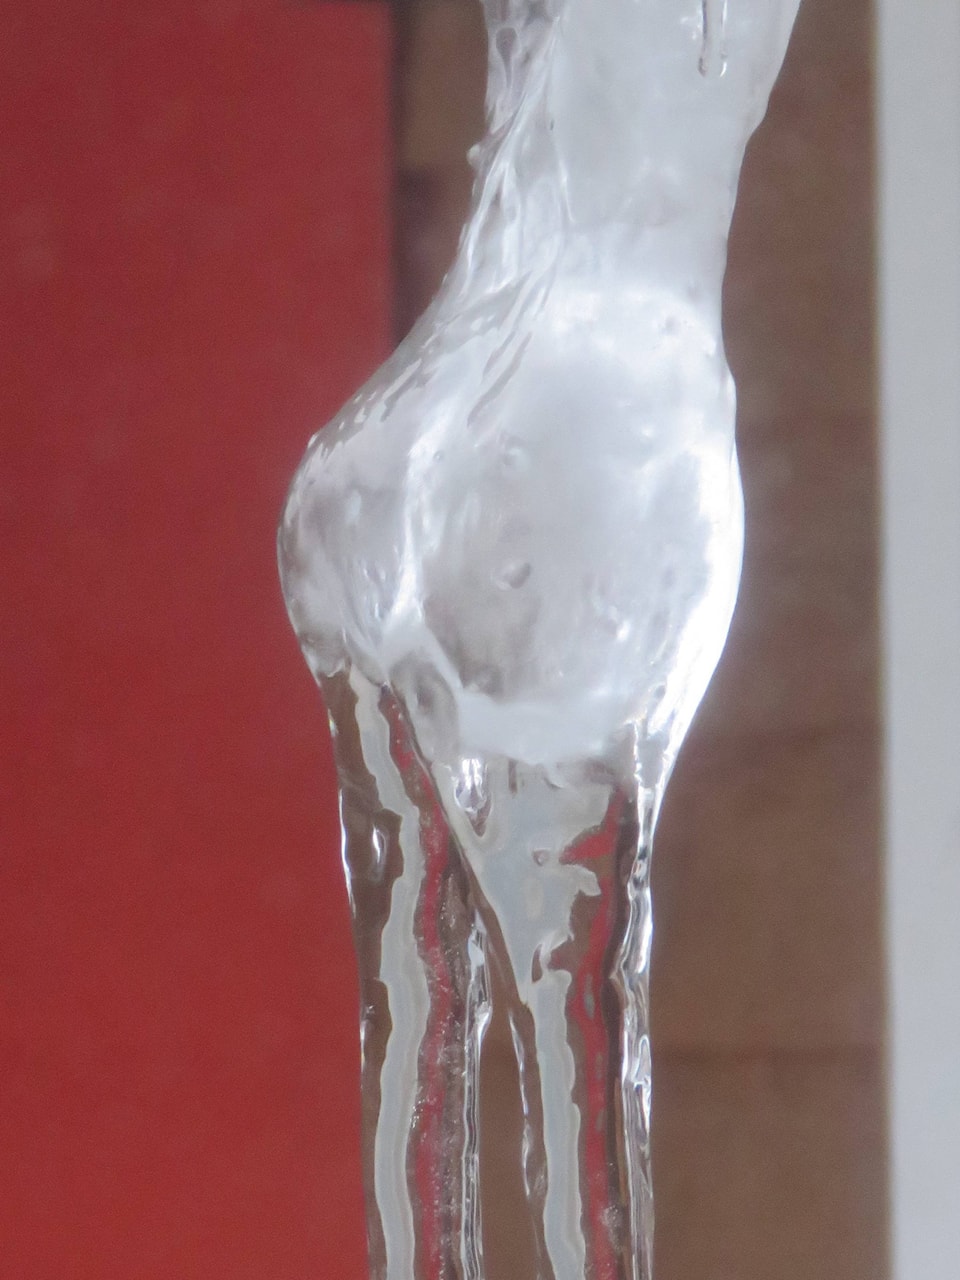 20374035_web1_200206-PSS-sexyice-icicle_1